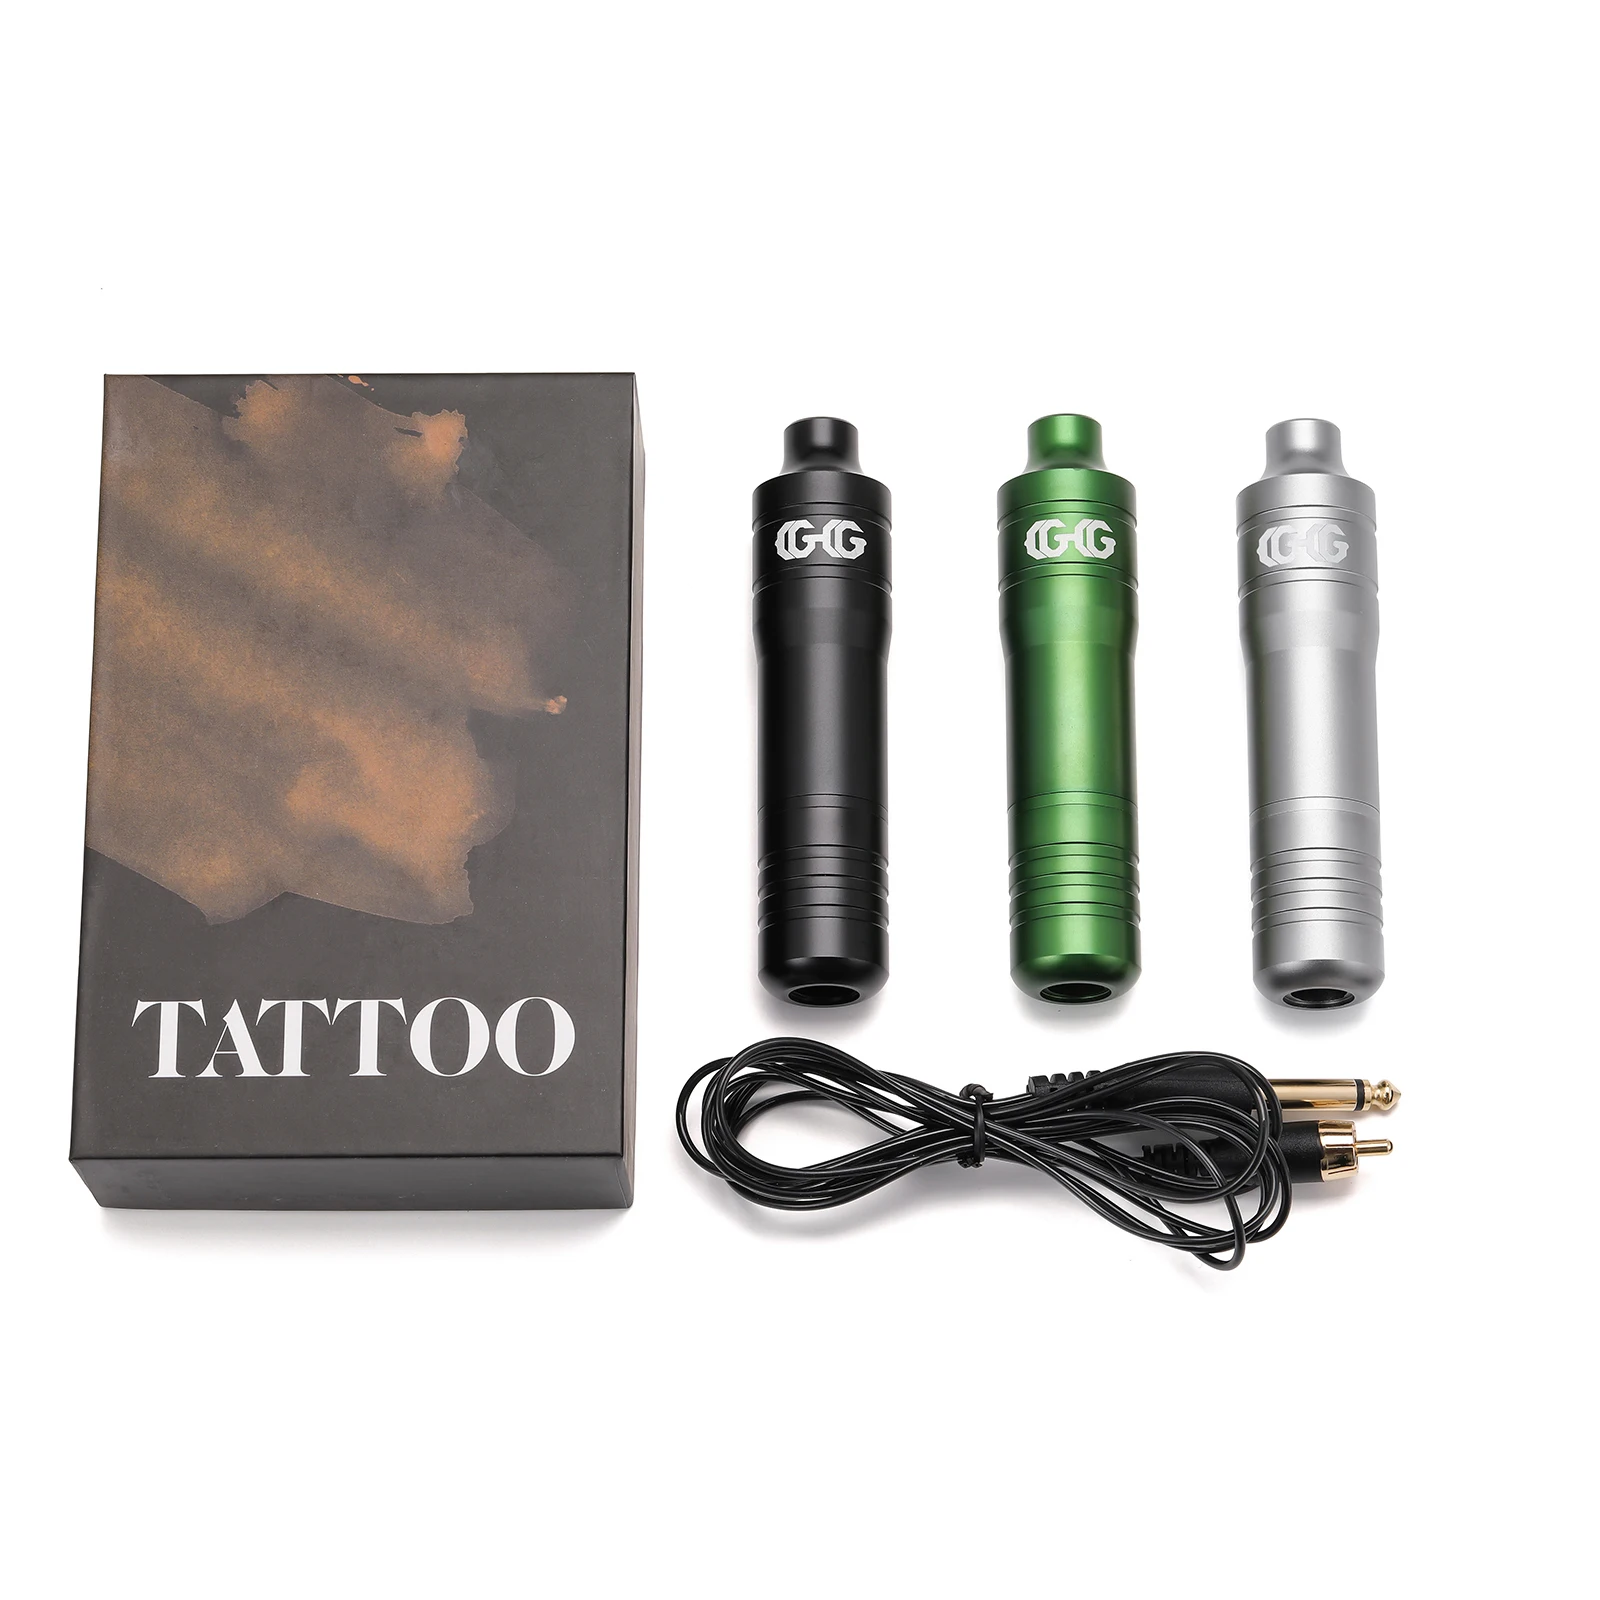 The tattoo pen with RCA cable is comfortable to hold, the needle is stable, and the color is fast tattoo equipment manufacturer